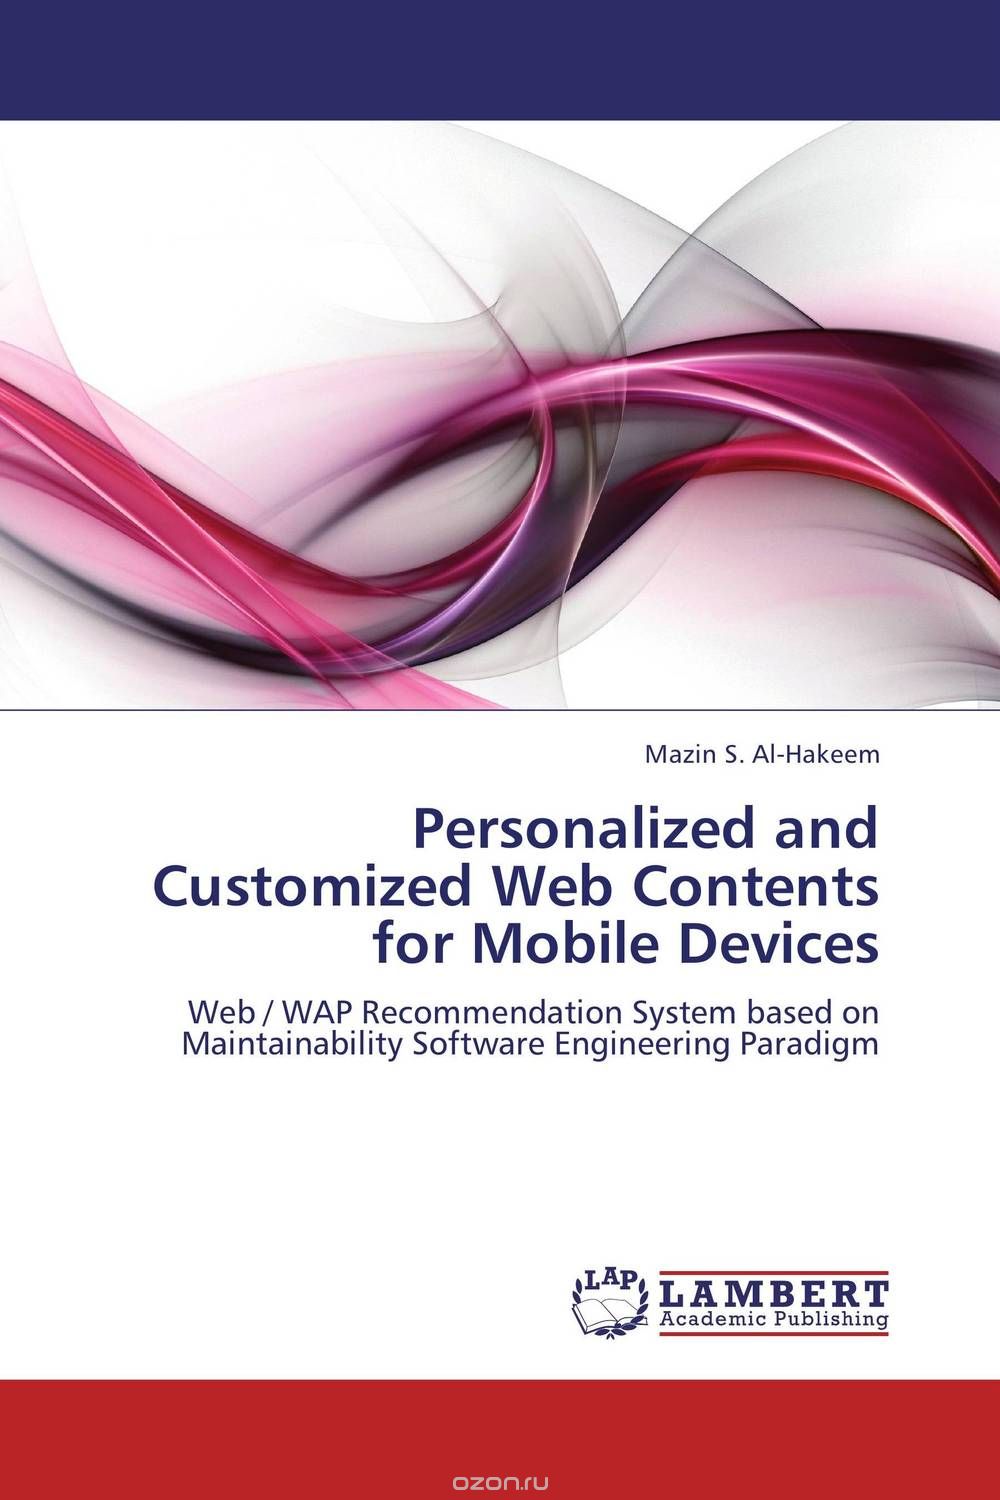 Personalized and Customized Web Contents for Mobile Devices